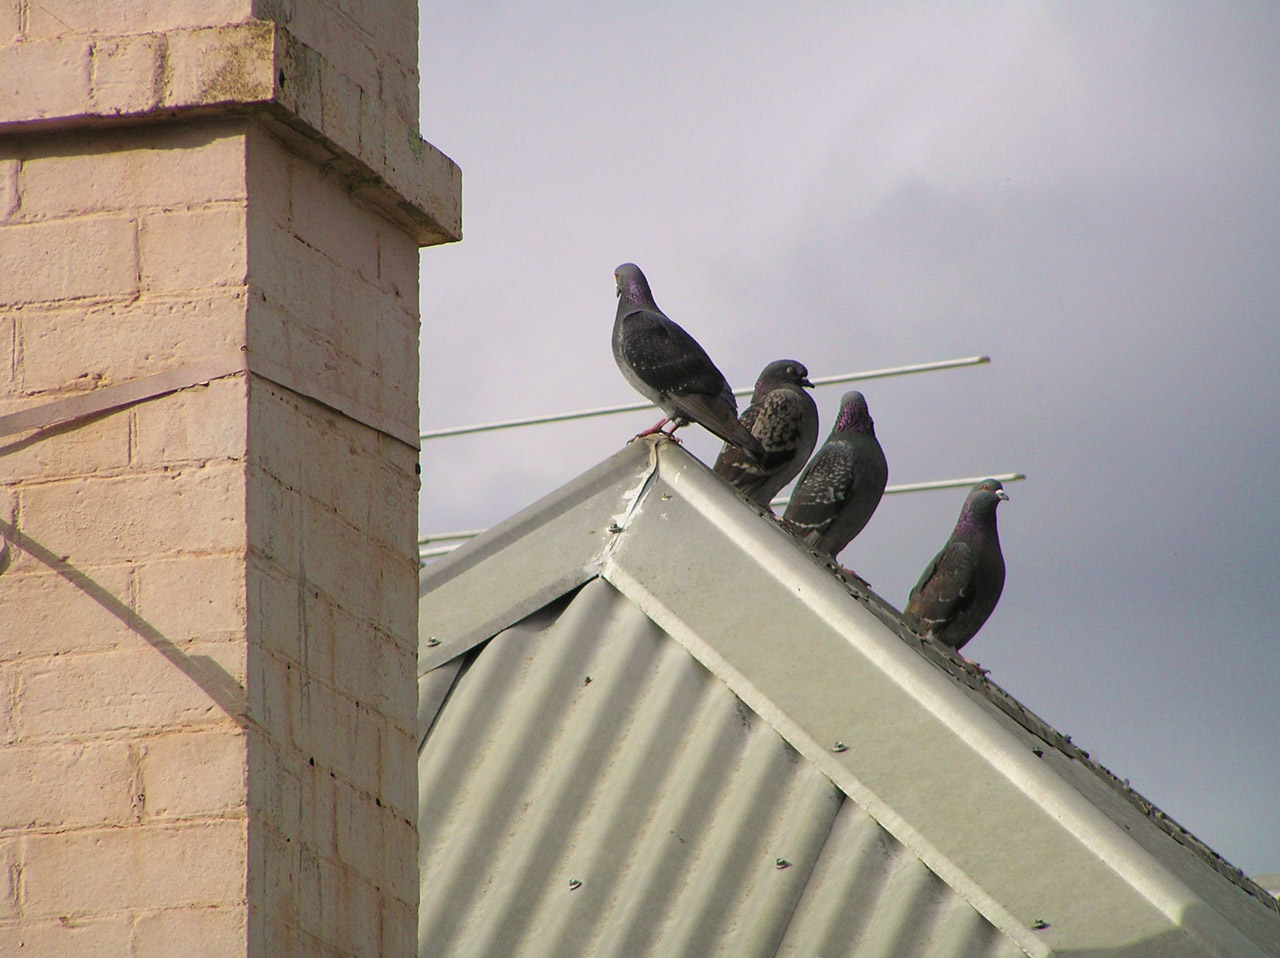 Pigeons on a tin roof with chimney plus cloudy sky